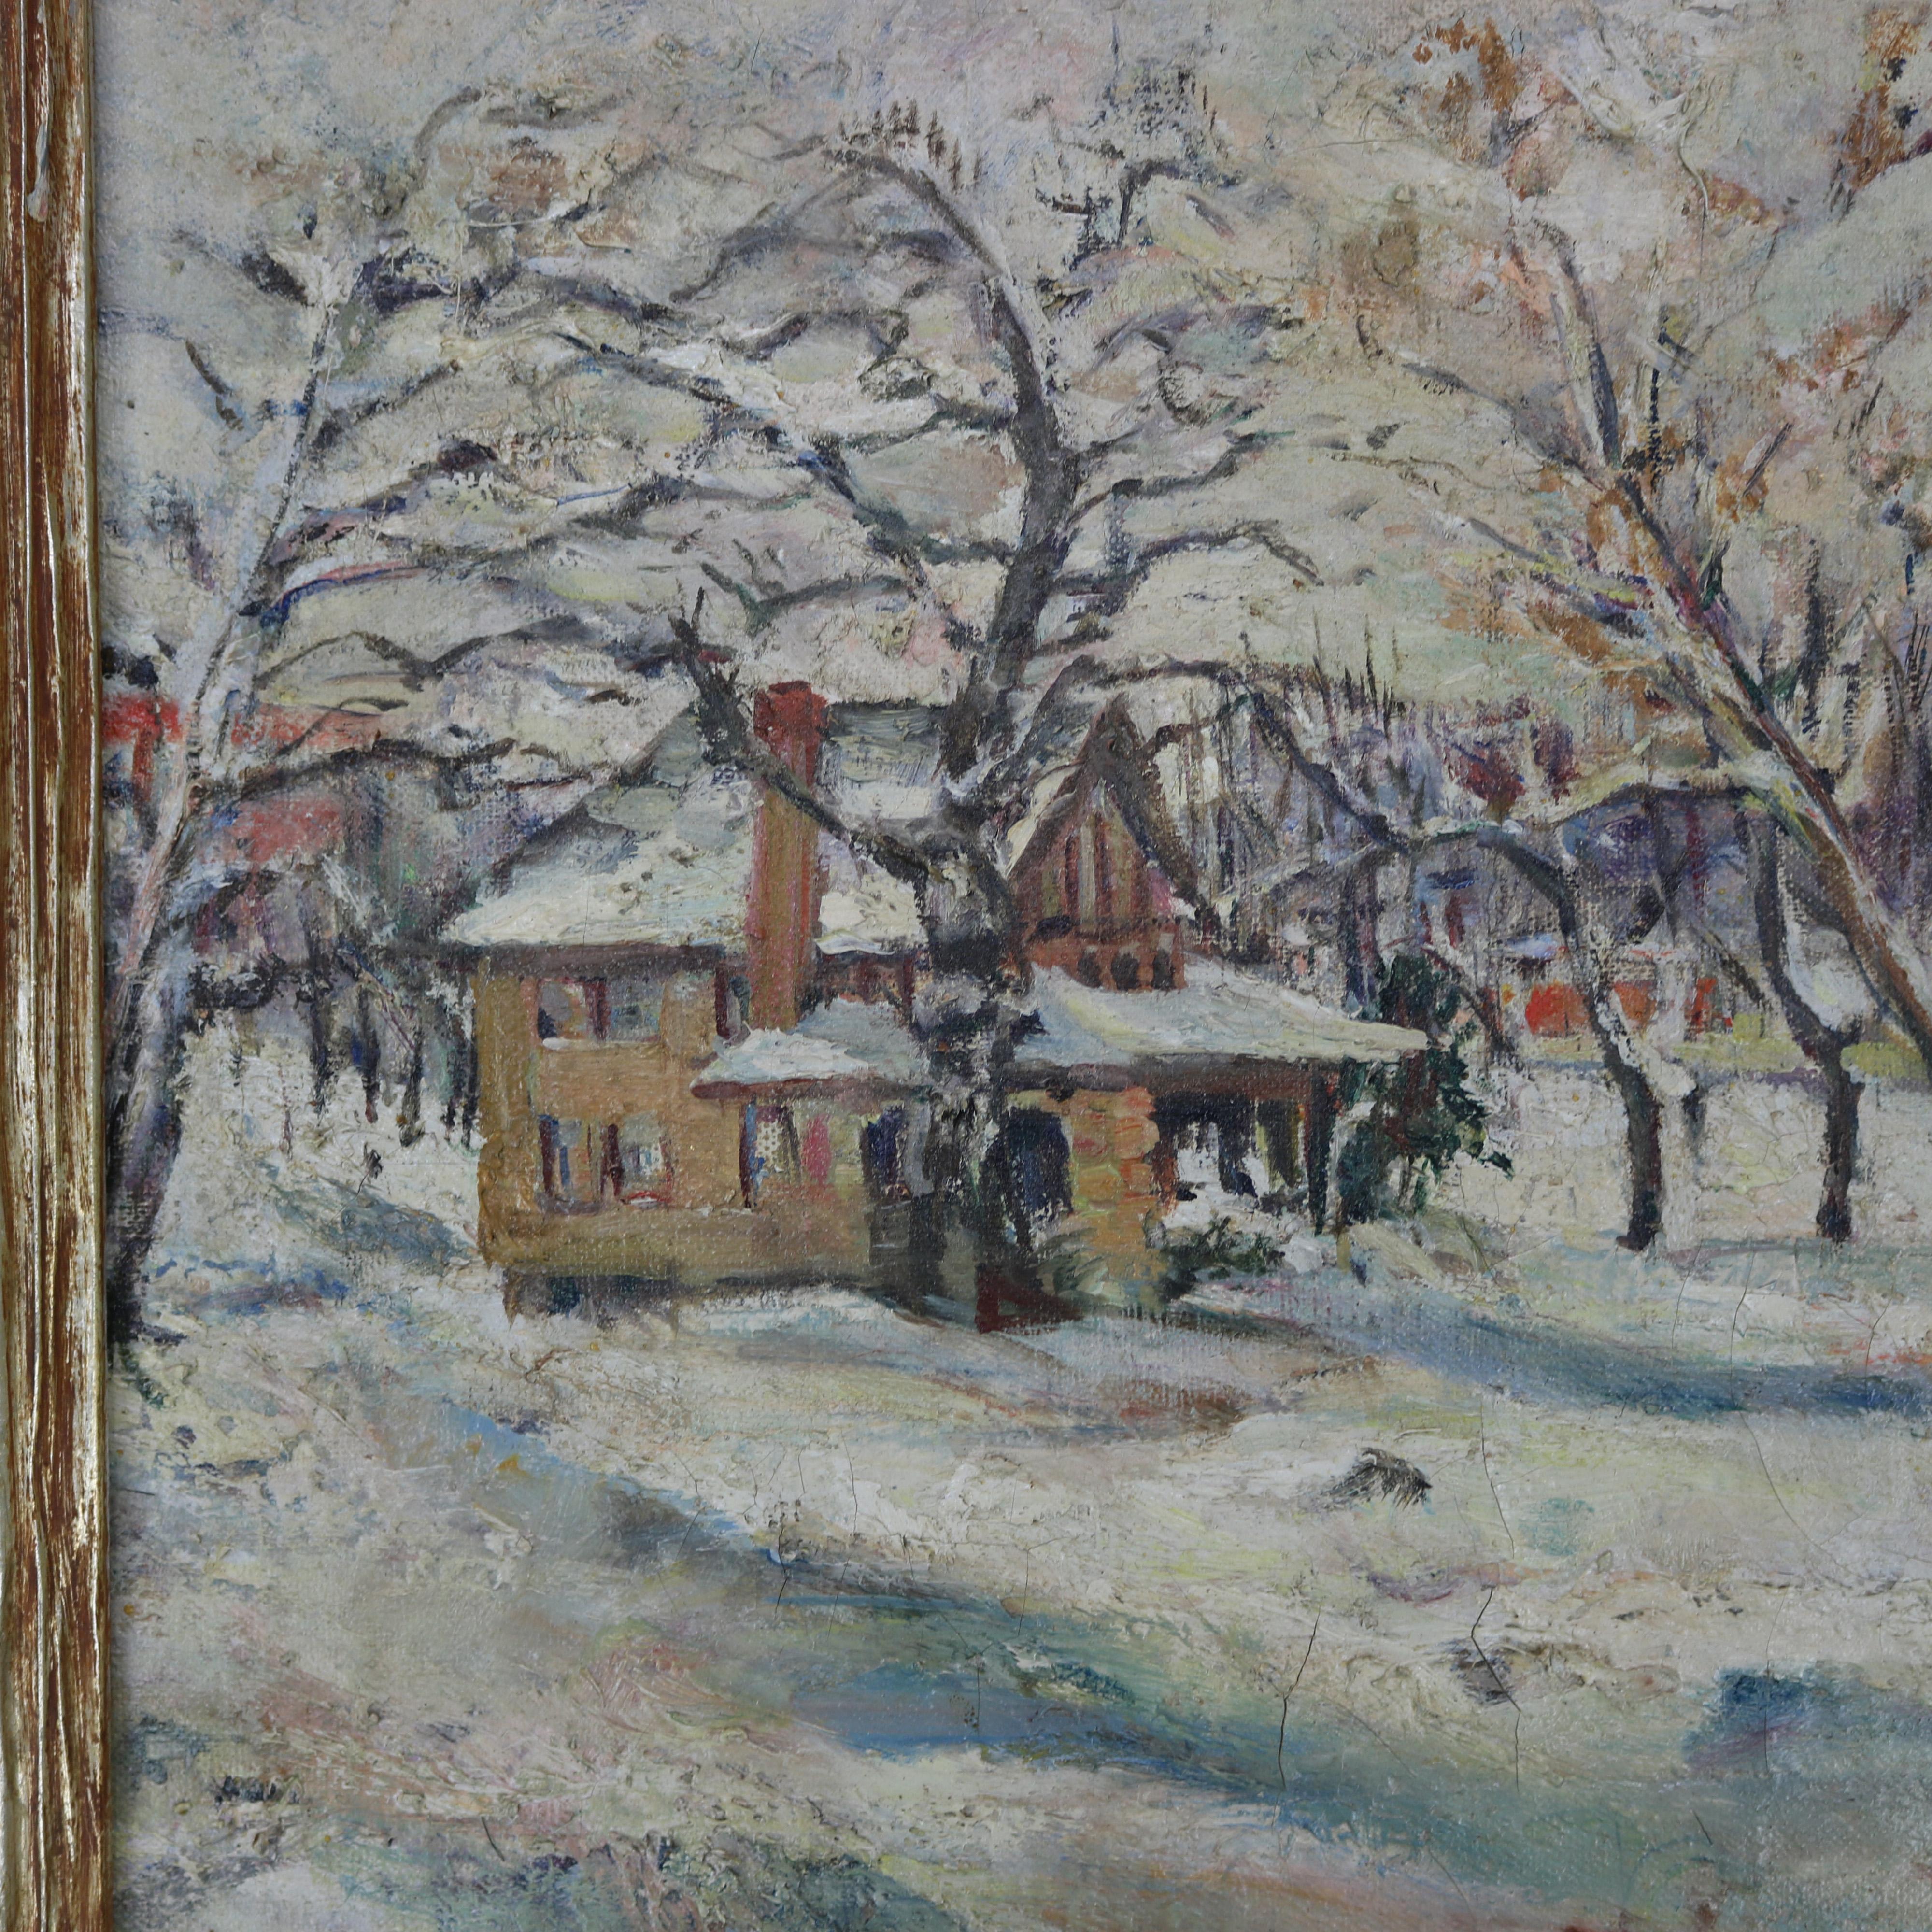 An antique impressionist painting in the manner of New Hope Walter Baum offers oil on canvas depiction of winter landscape scene with structure, lower right artist signed and seated in Arts and Crafts giltwood frame, c1930.

Measures: 14.5